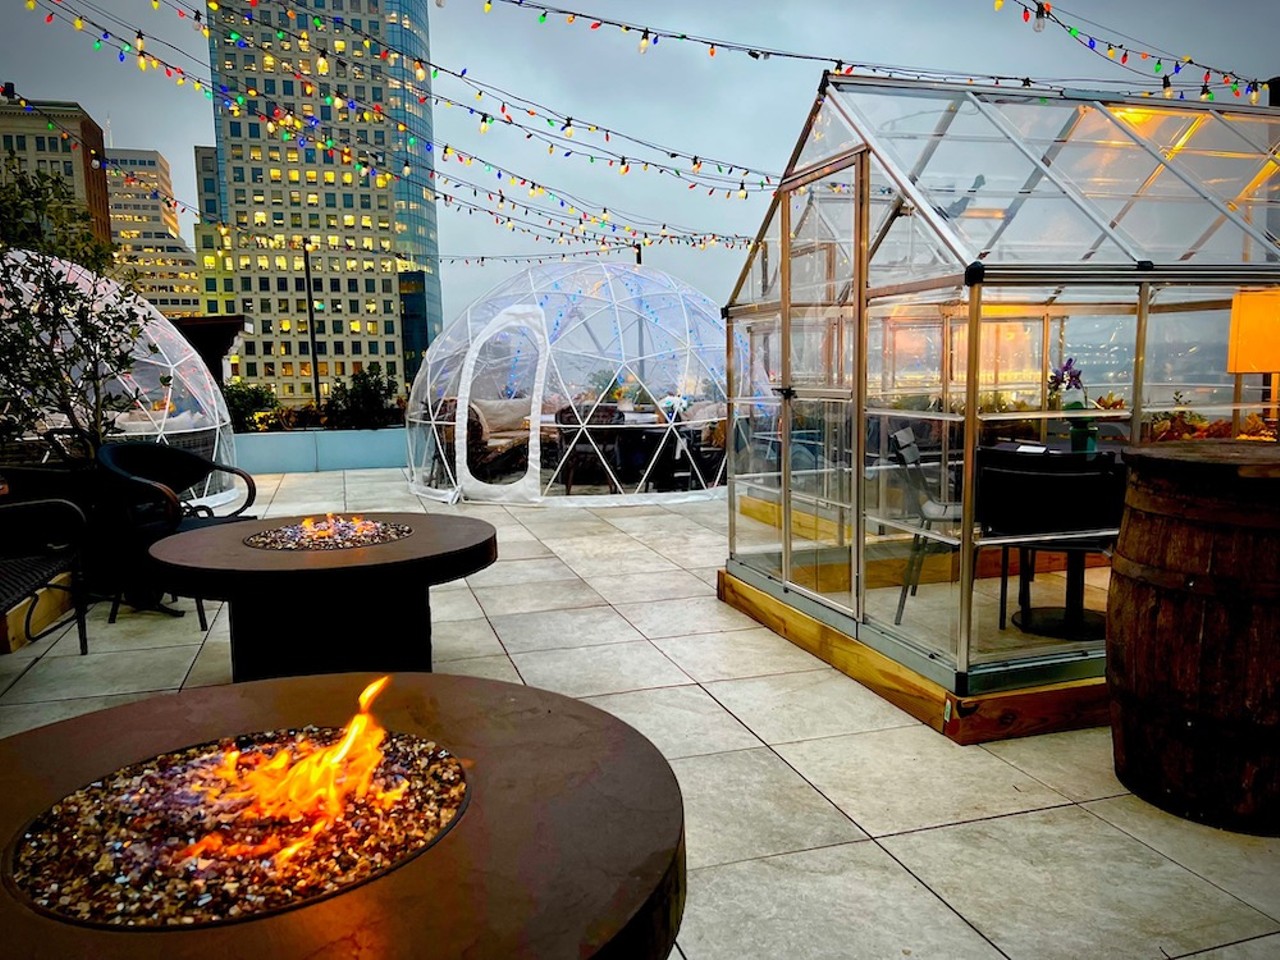 The View at Shires’ Garden
309 Vine St., 10th Floor, Downtown
The rooftop deck at Shires’ Garden has brought back its igloos and special garden greenhouses for the winter, and its also decked out in colorful holiday lights to help you live out your Hallmark movie fantasies. Their menu also has some cozy cocktails and hot drinks to keep you warm throughout the season.